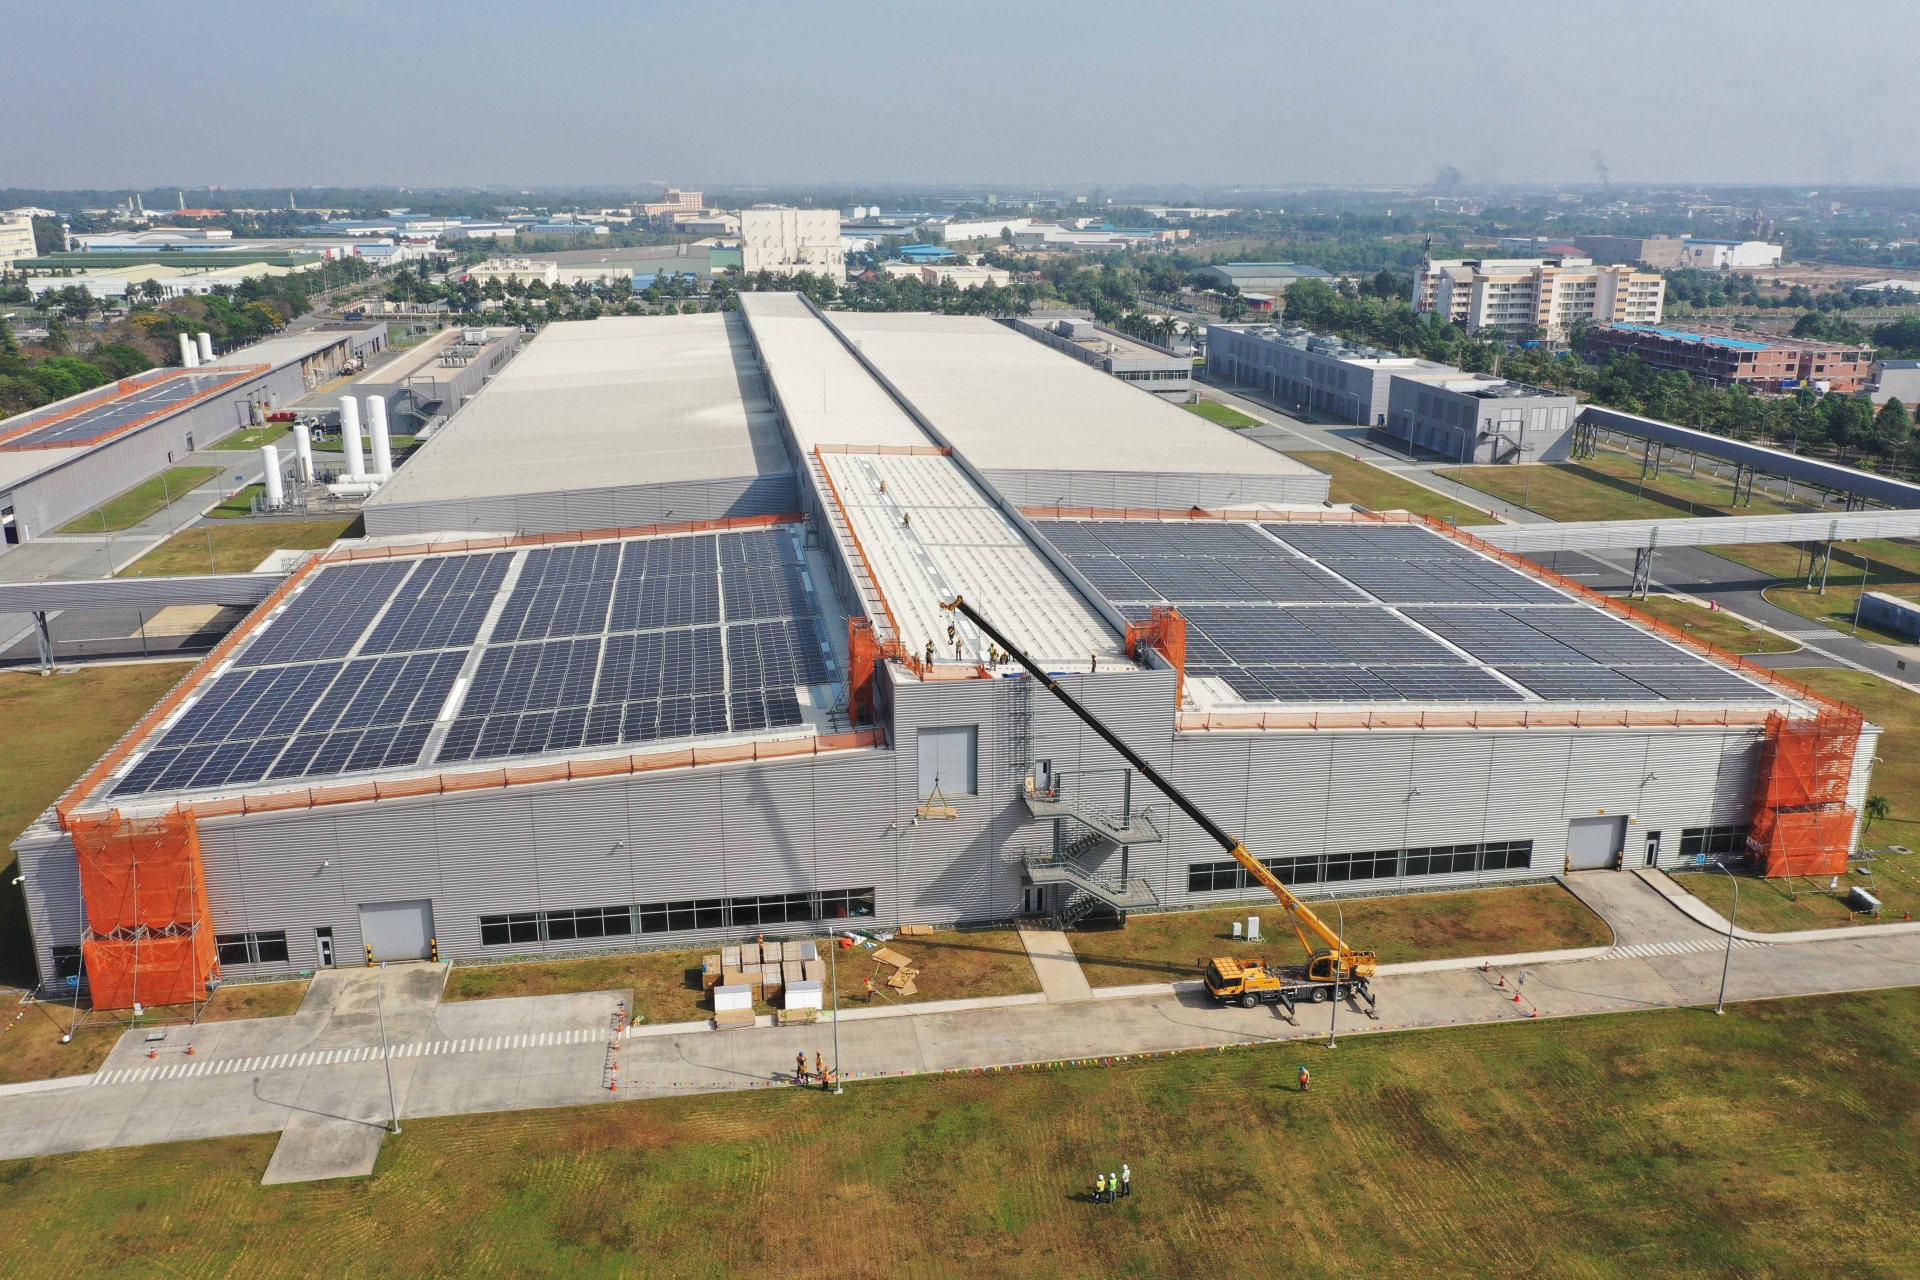 Bosch Vietnam plant launches rooftop solar system, advancing sustainable energy goals